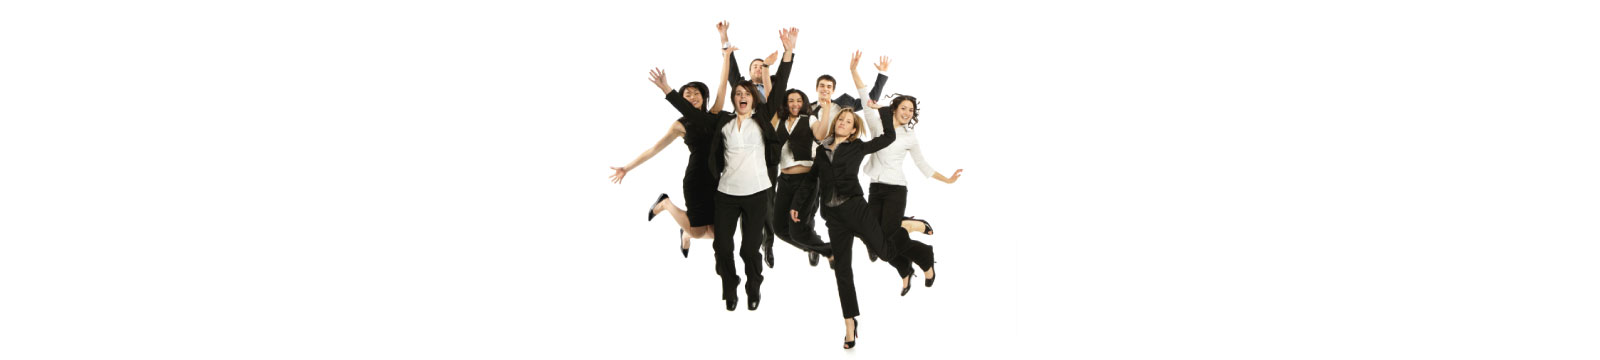 Employees Jumping with Excitement